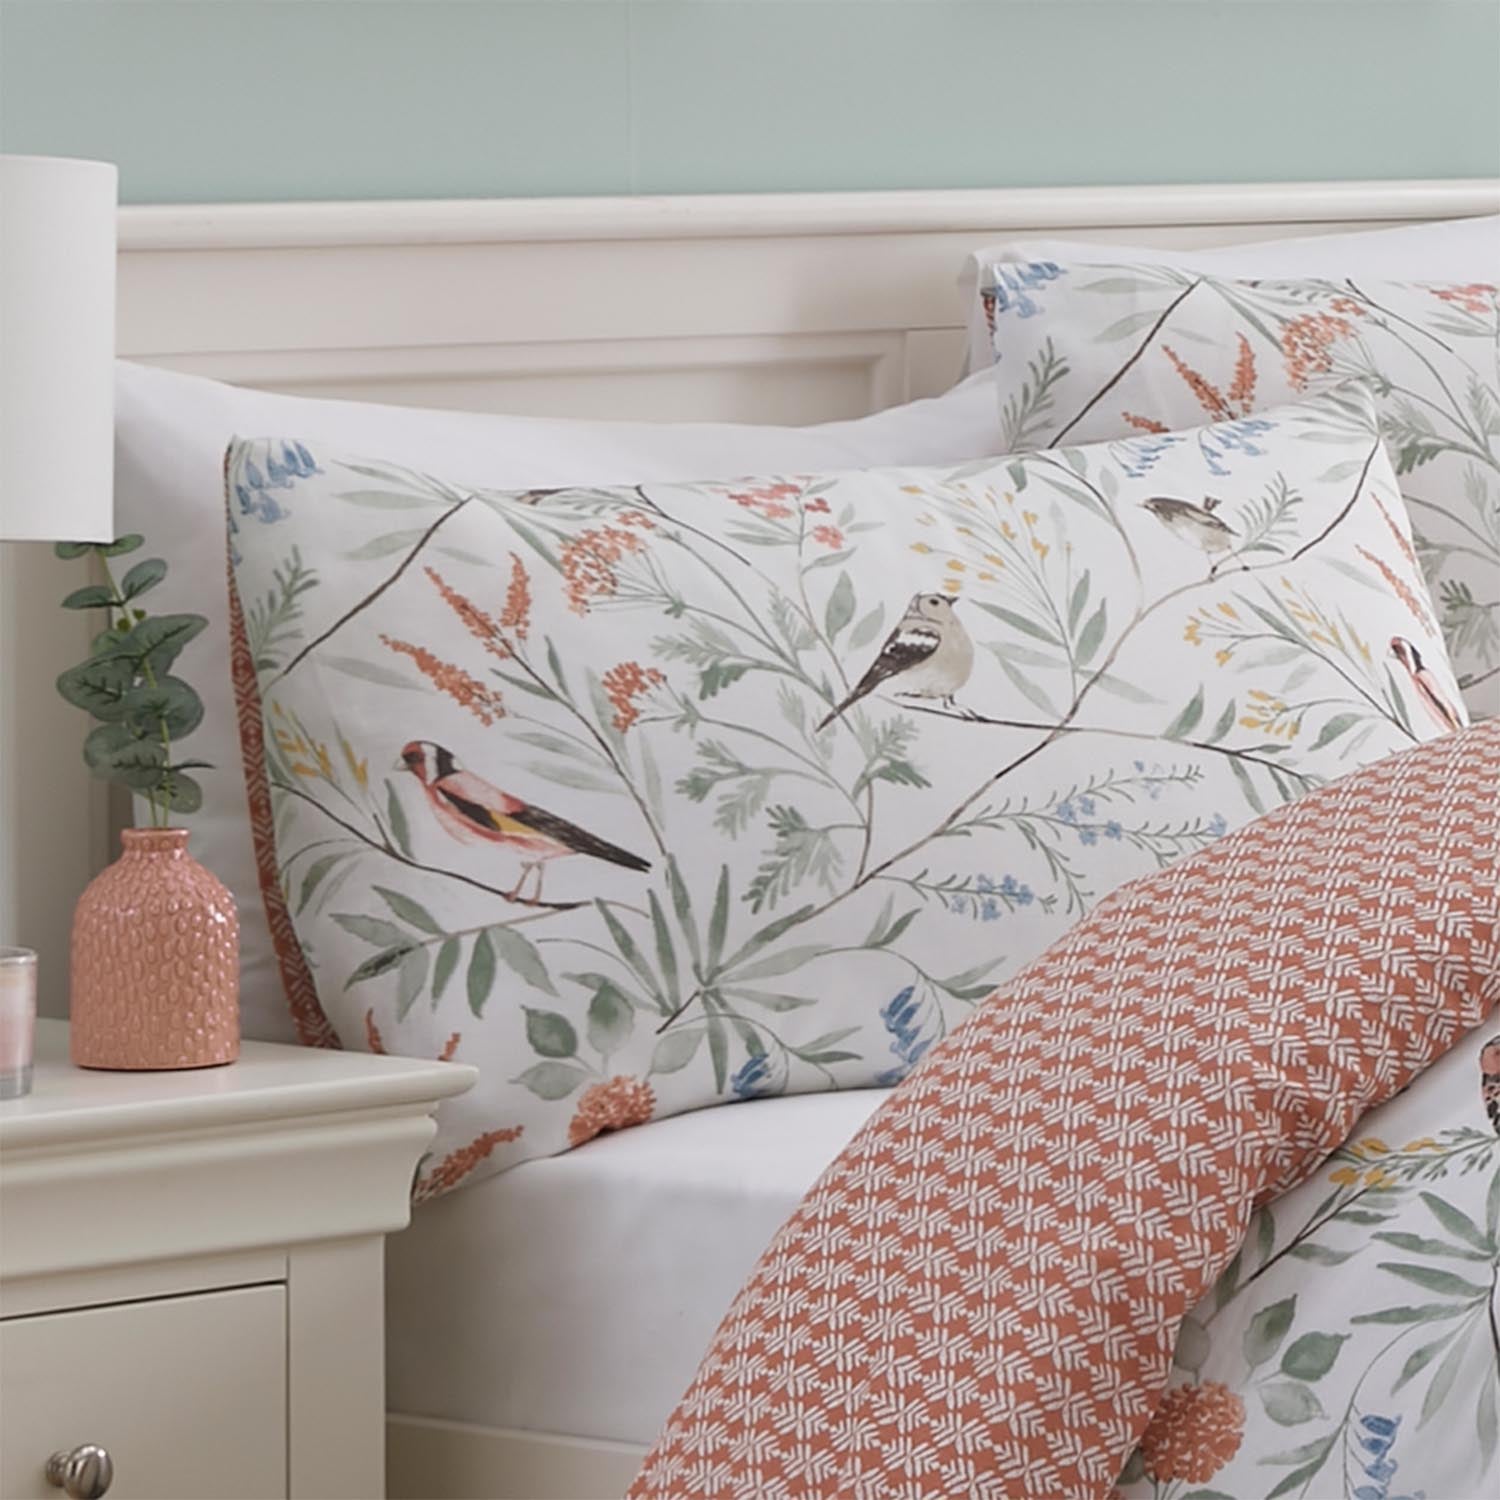  The Home Collection Bird Floral Terracotta Duvet Cover Set 3 Shaws Department Stores